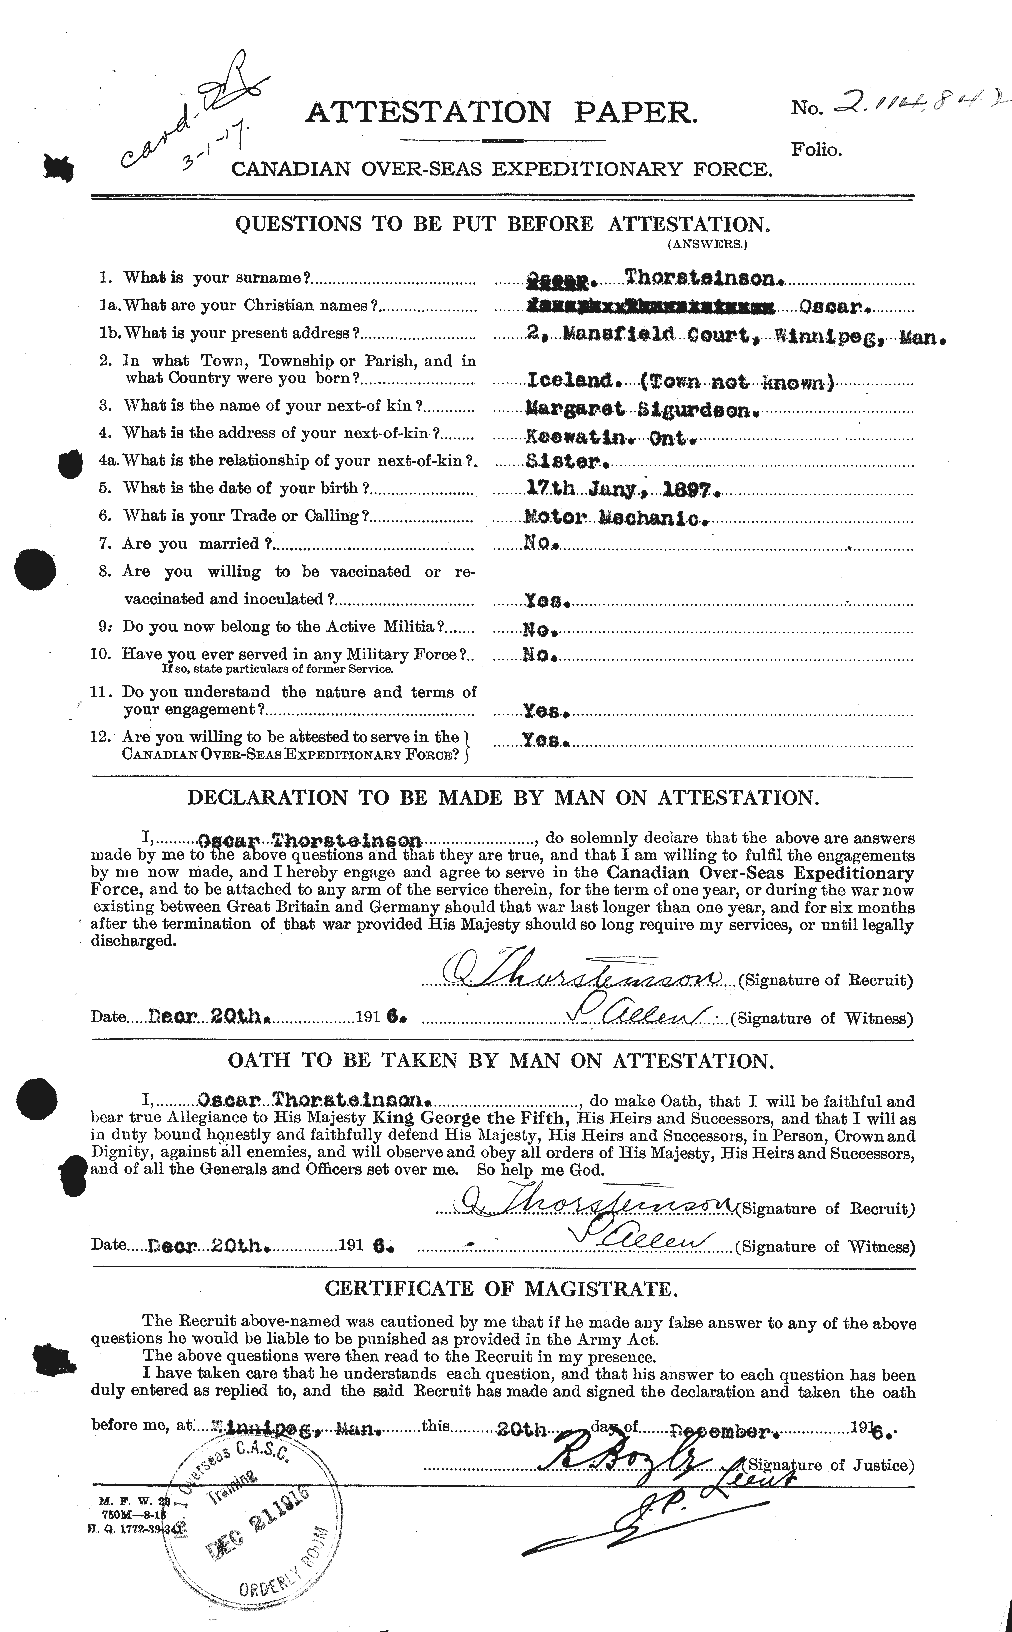 Personnel Records of the First World War - CEF 633865a